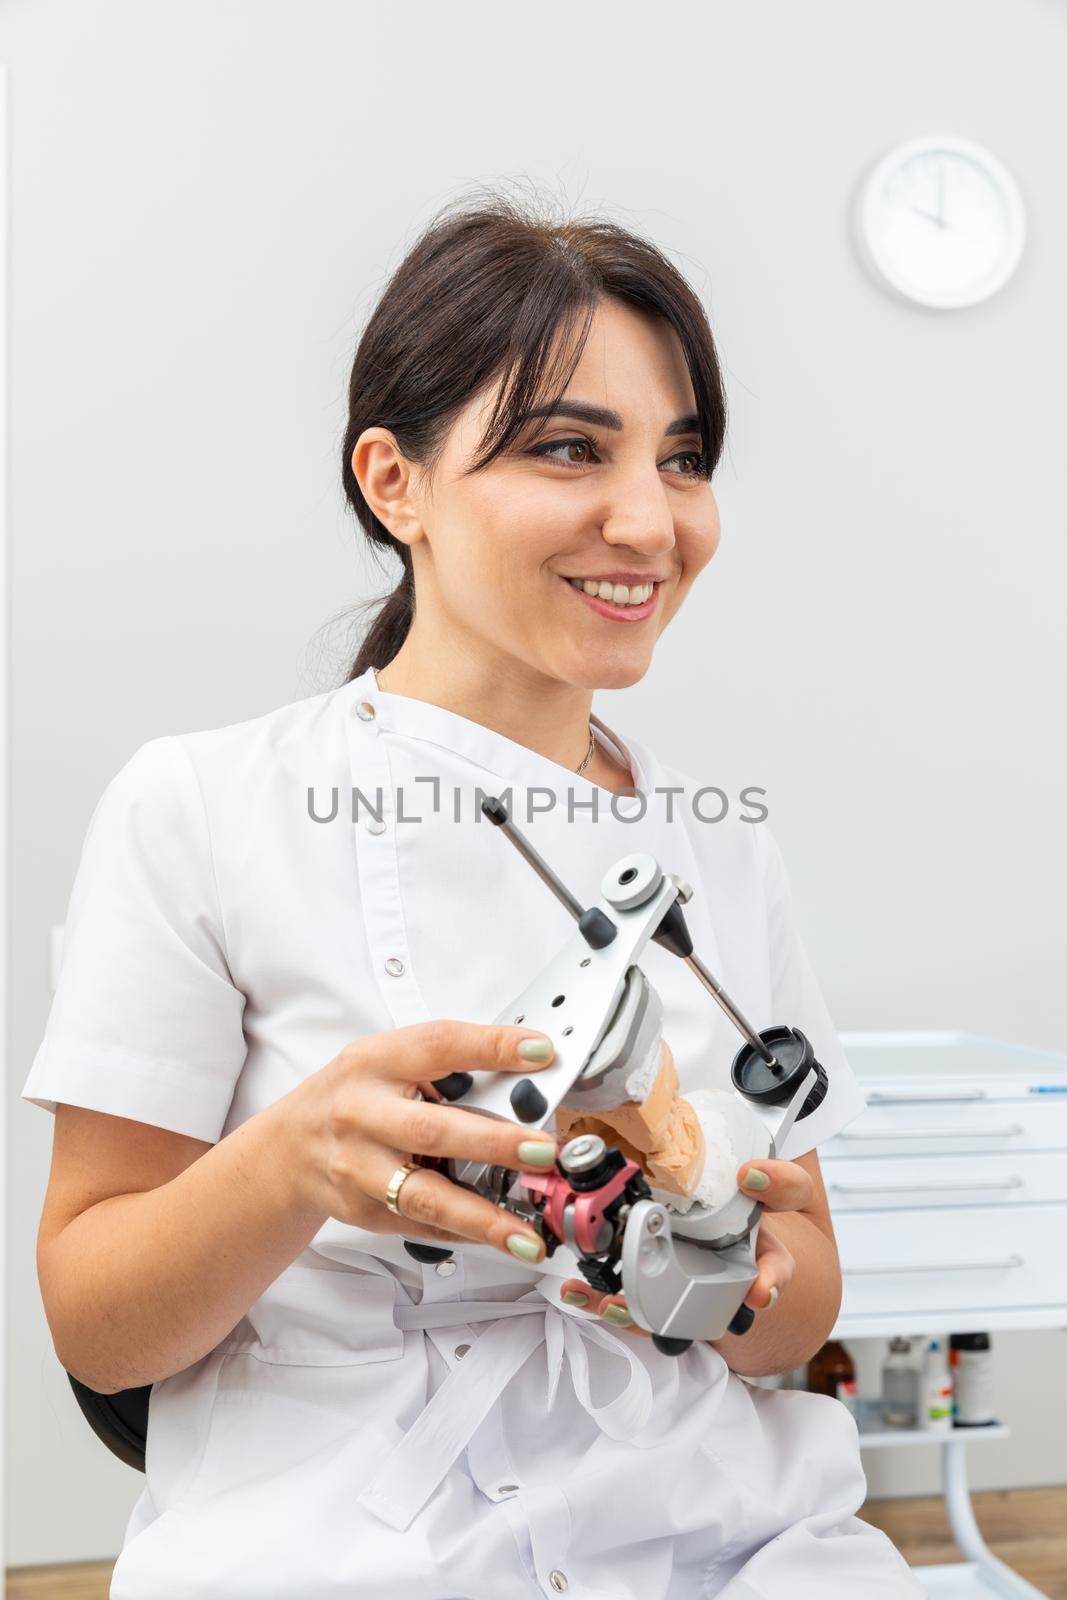 medical dental laboratory articulator occludator for determining occlusion, ratio of jaws of human teeth